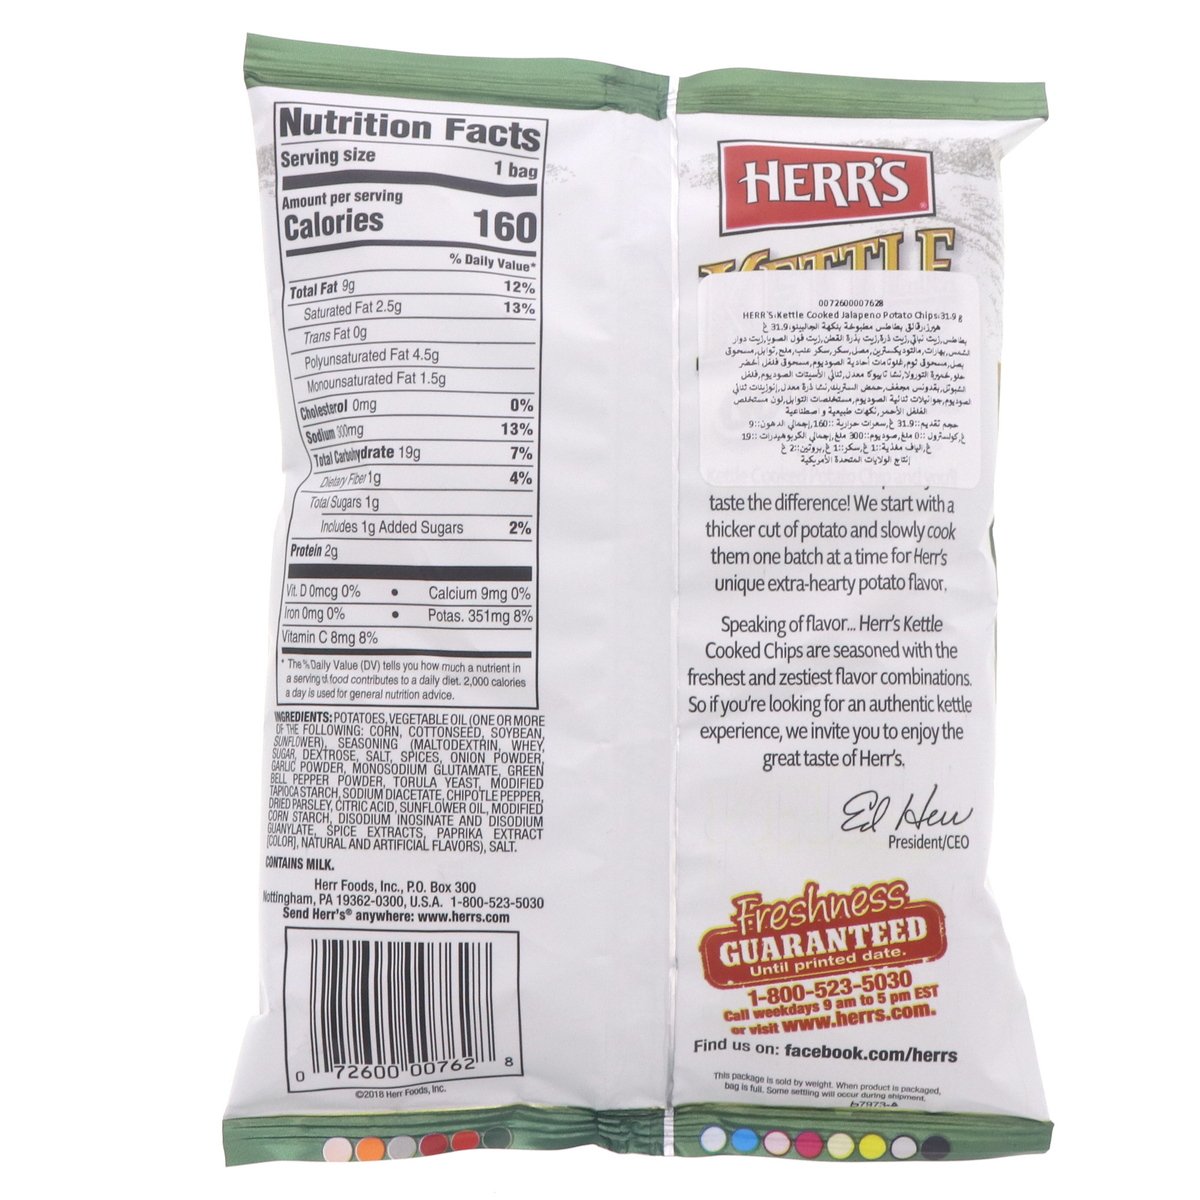 Herr's Kettle Cooked Jalapeno Flavored Potato Chips 31.9 g